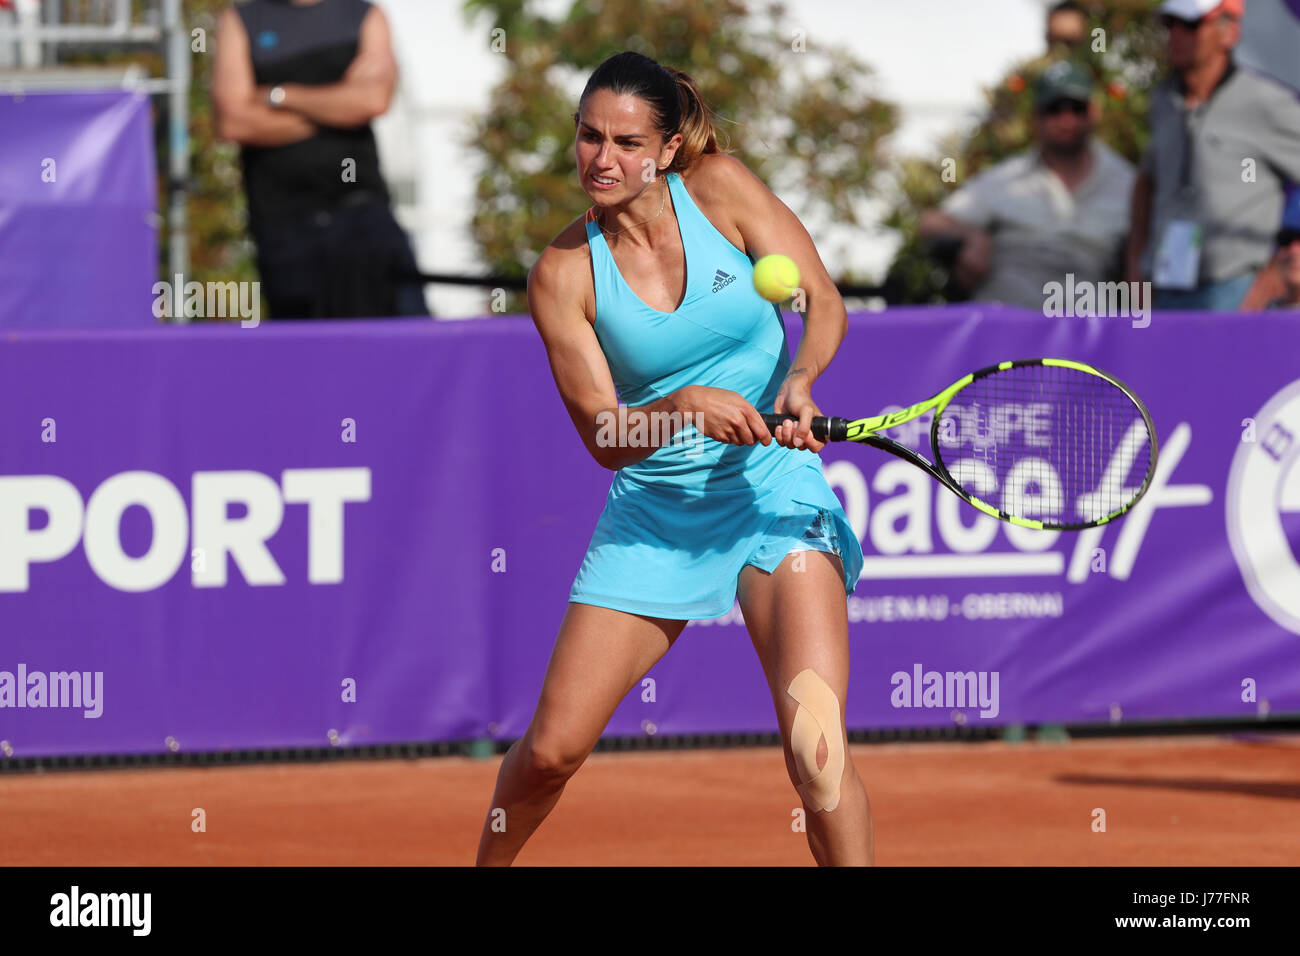 Strasbourg, France. 23rd May, 2017. French player Amandine Hesse is in  action during her match in the 2nd round of the WTA tennis Internationaux  of Strasbourg vs Chinese tennis player Shuai Peng